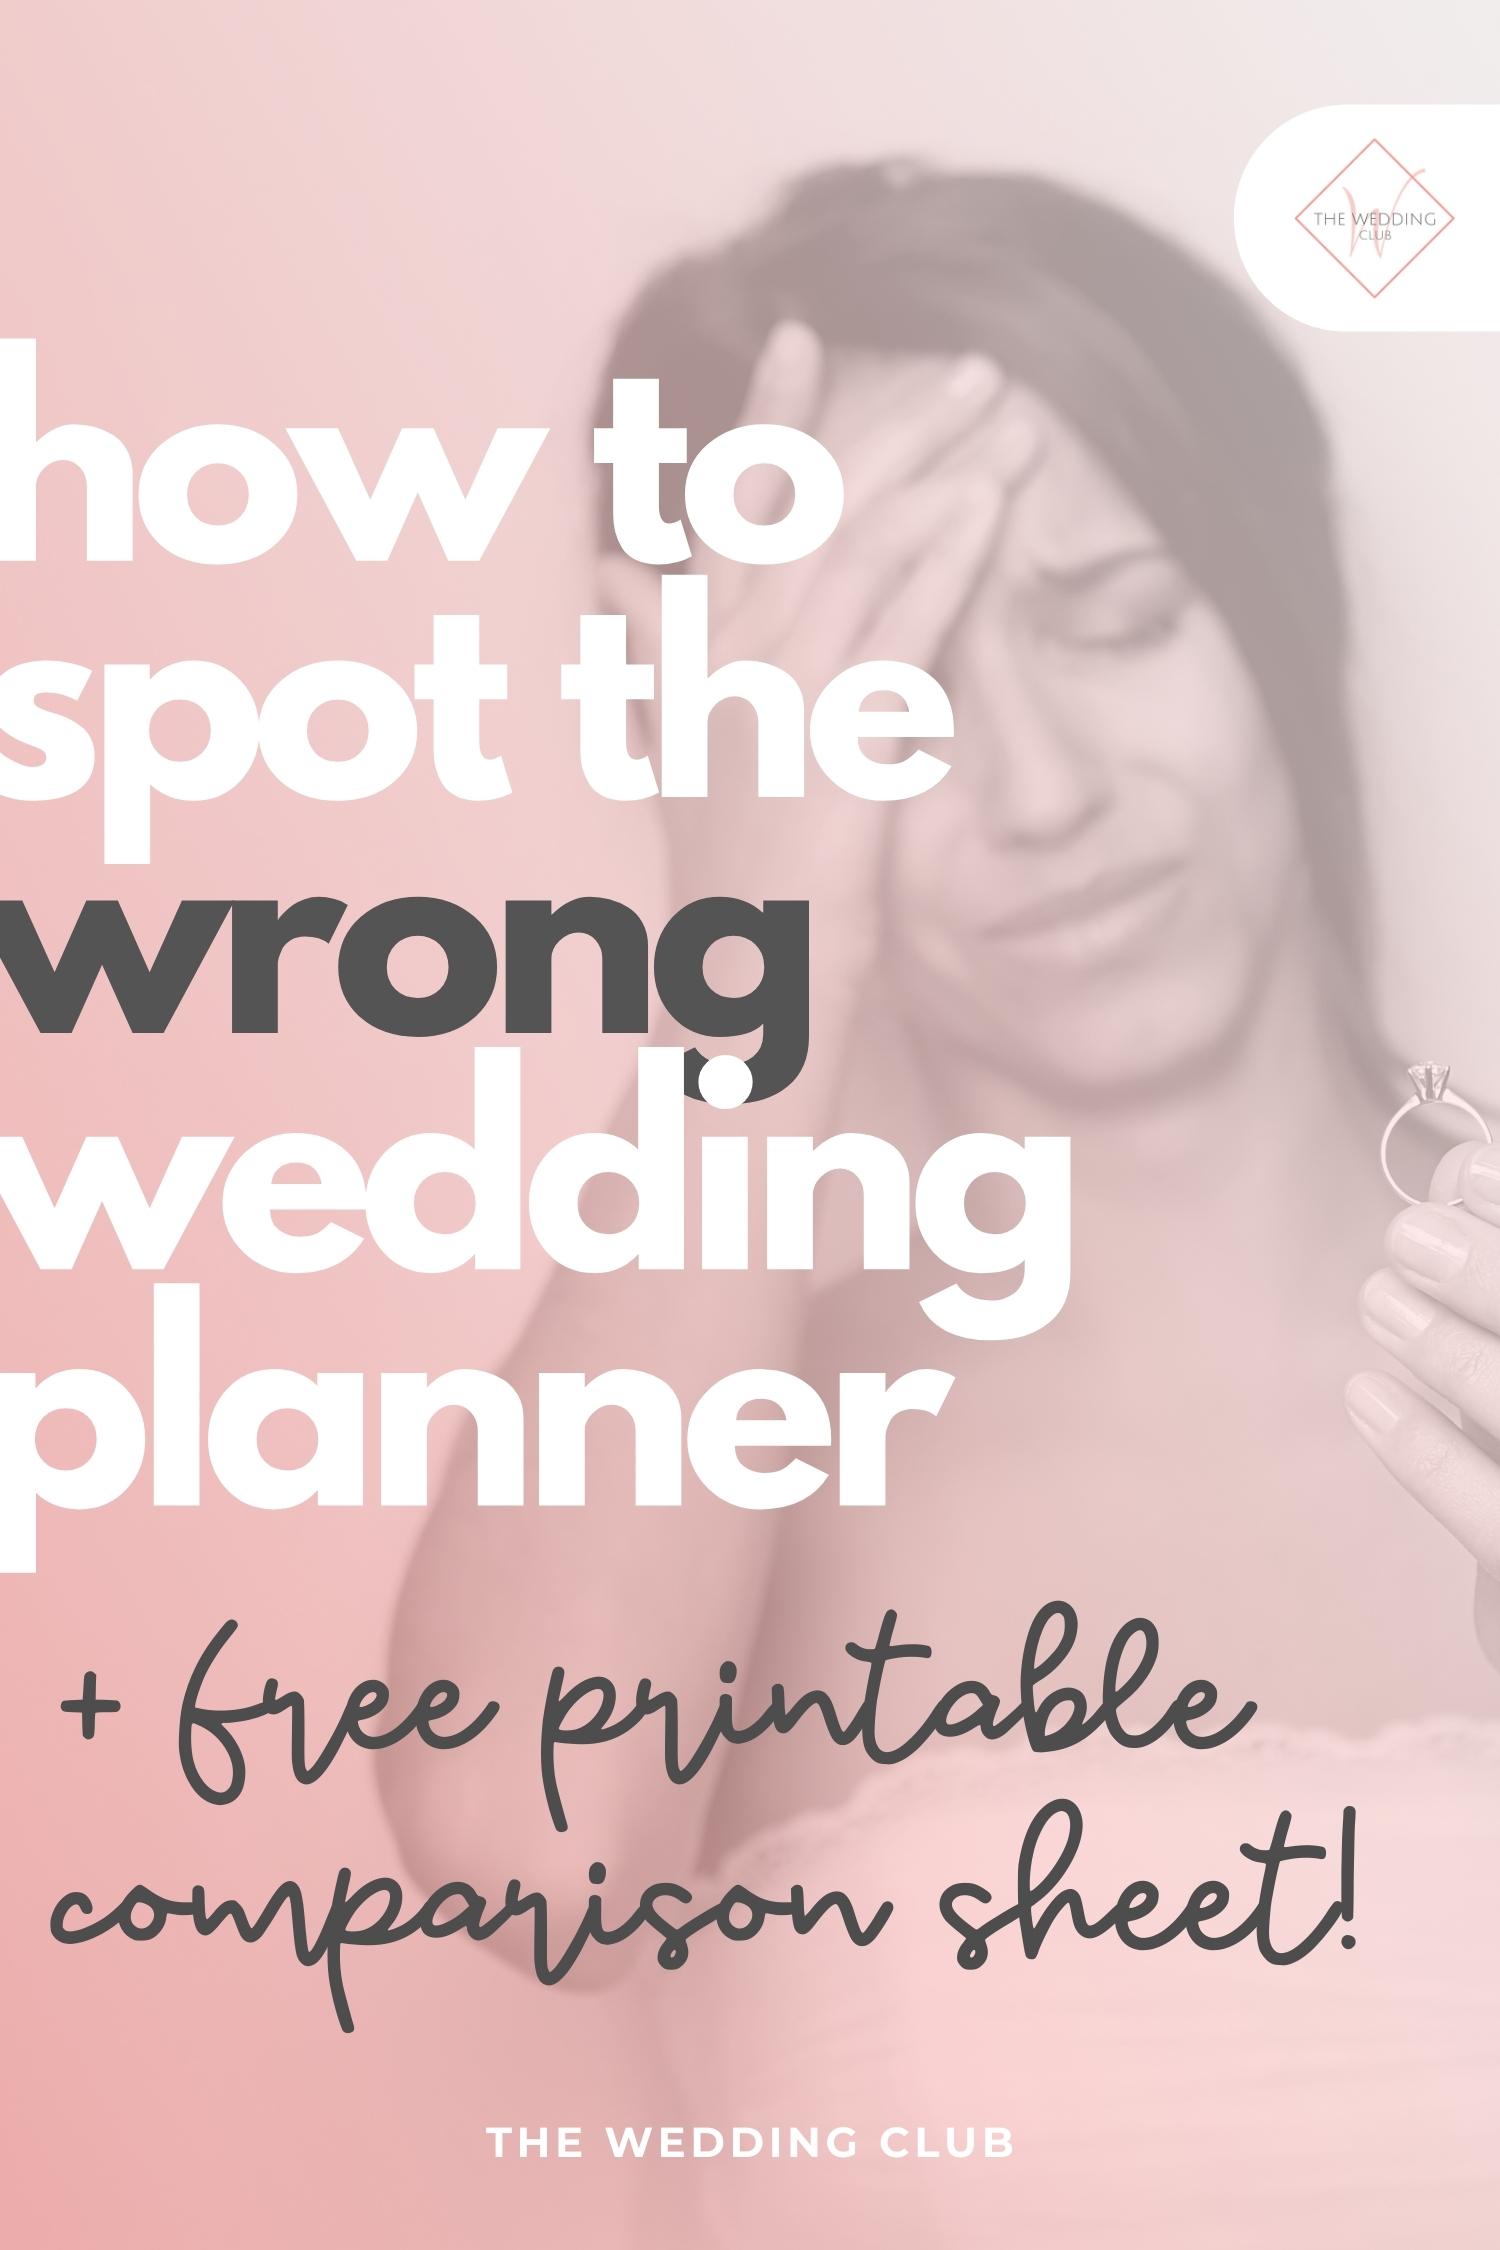 WARNING! How to spot the WRONG wedding planner! + FREE Wedding Planner Comparison Sheet